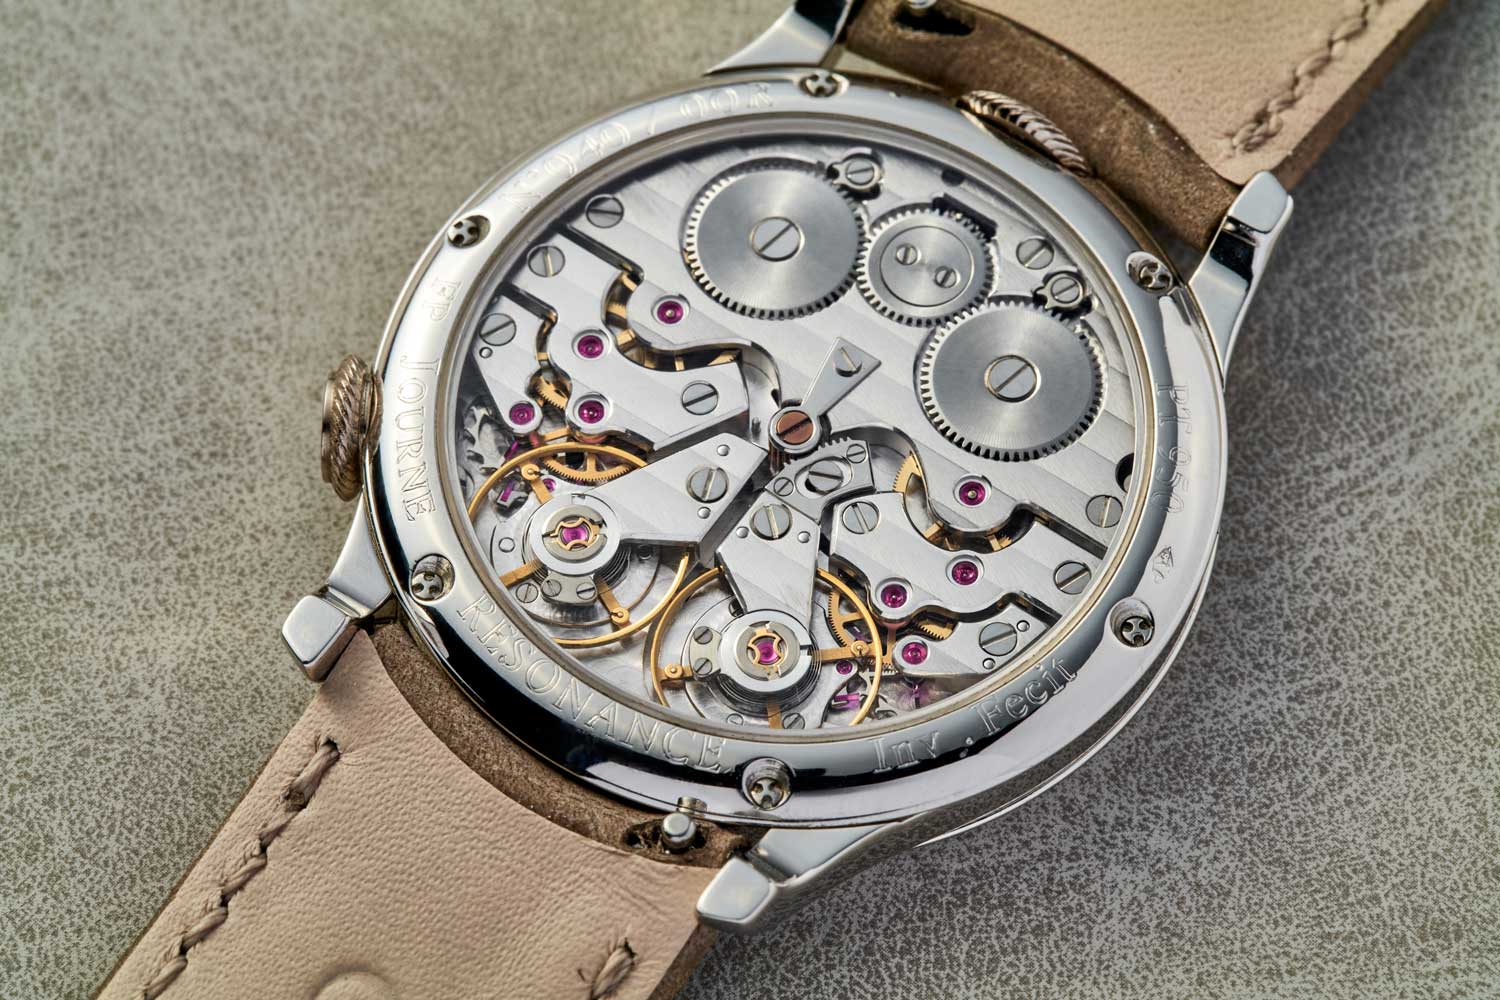 The case back bears the serial number 040/00R, with the suffix 00R indicating that it was produced in 2000 and its serial number 40 would make it only the 20th Chronomètre à Résonance watch made. The inscriptions on the case back are noticeably shallower as they were engraved by hand, as opposed to the deeper engravings applied by laser found on the Souscription series